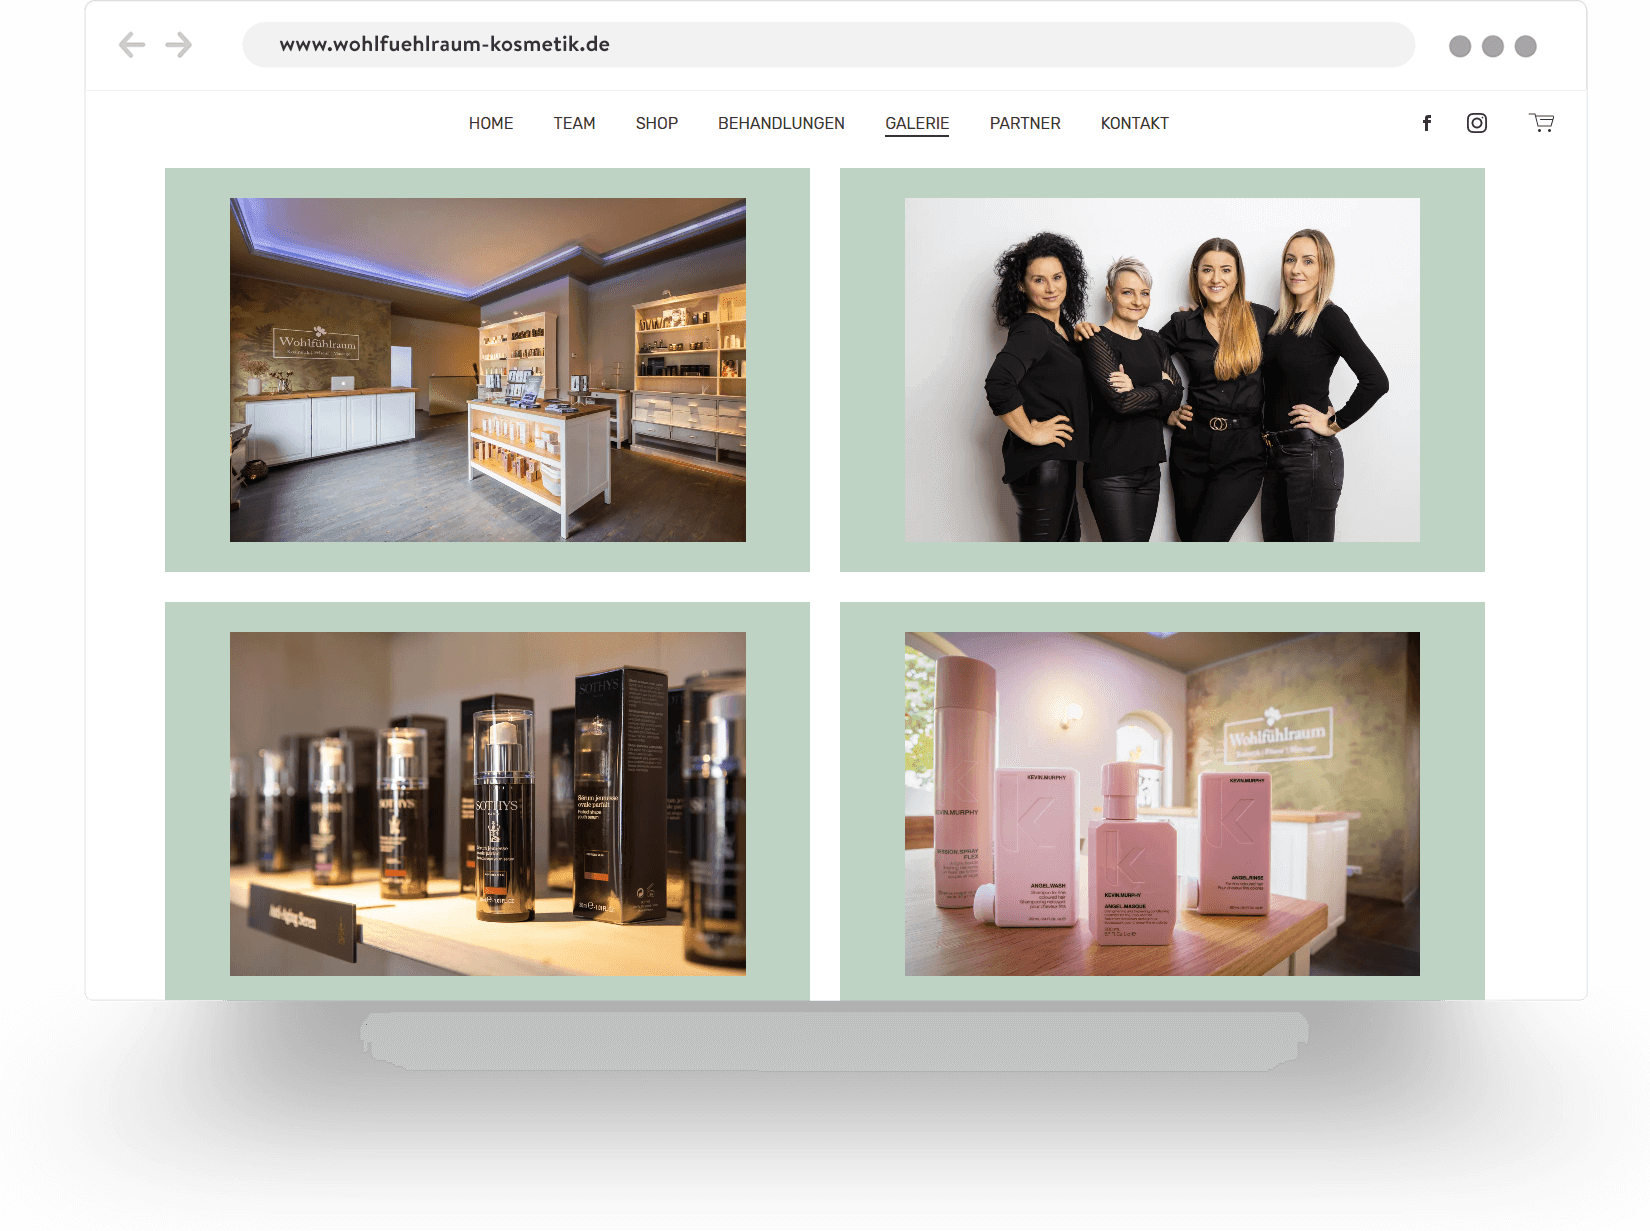 Example of a gallery page from a beauty salon website built with Jimdo showing the salon, four team members, and their products